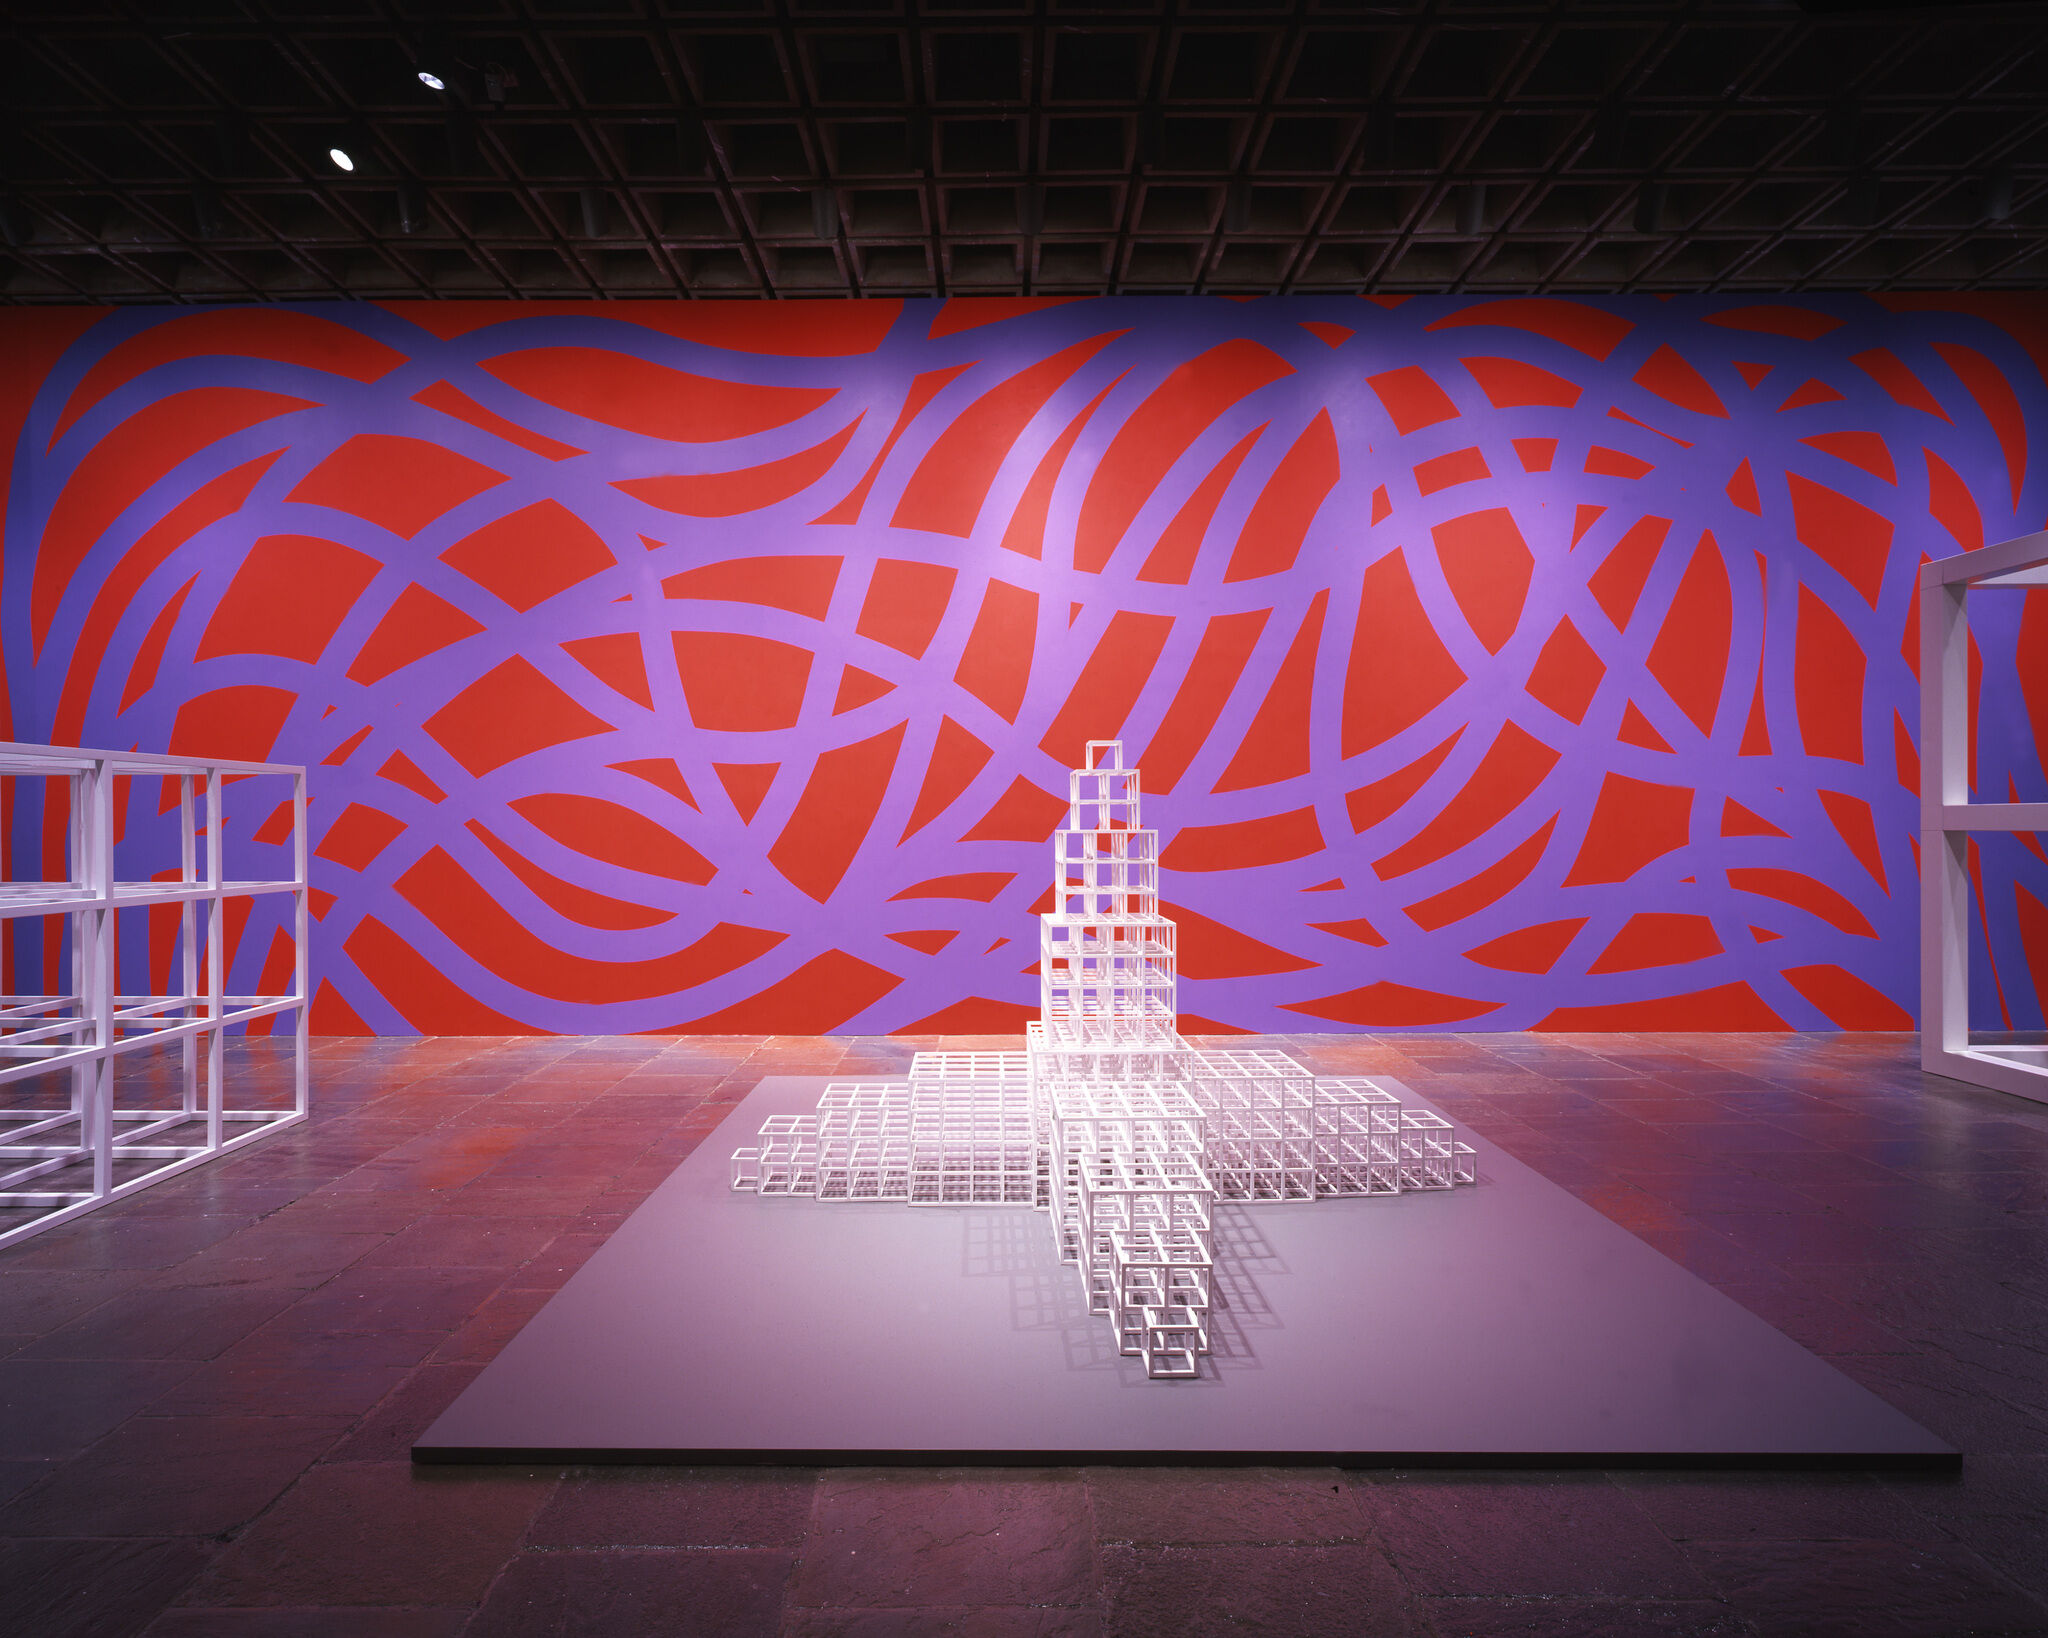 White geometric sculptures displayed in front of a red and blue abstract wall art in a gallery.